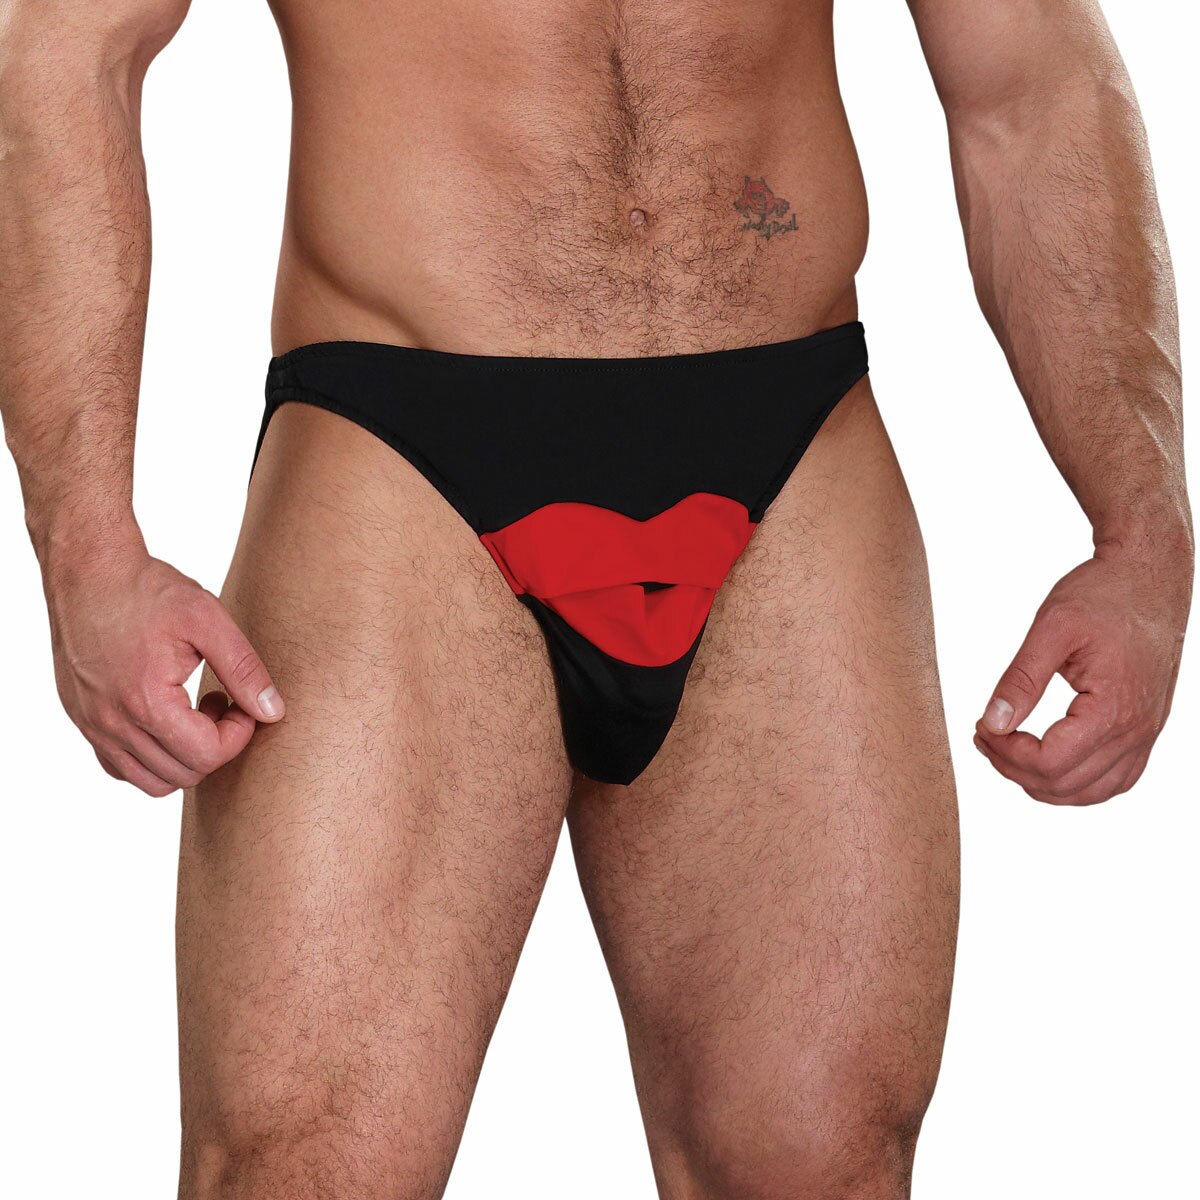 SALE - Red Lips Mens Novelty Brief